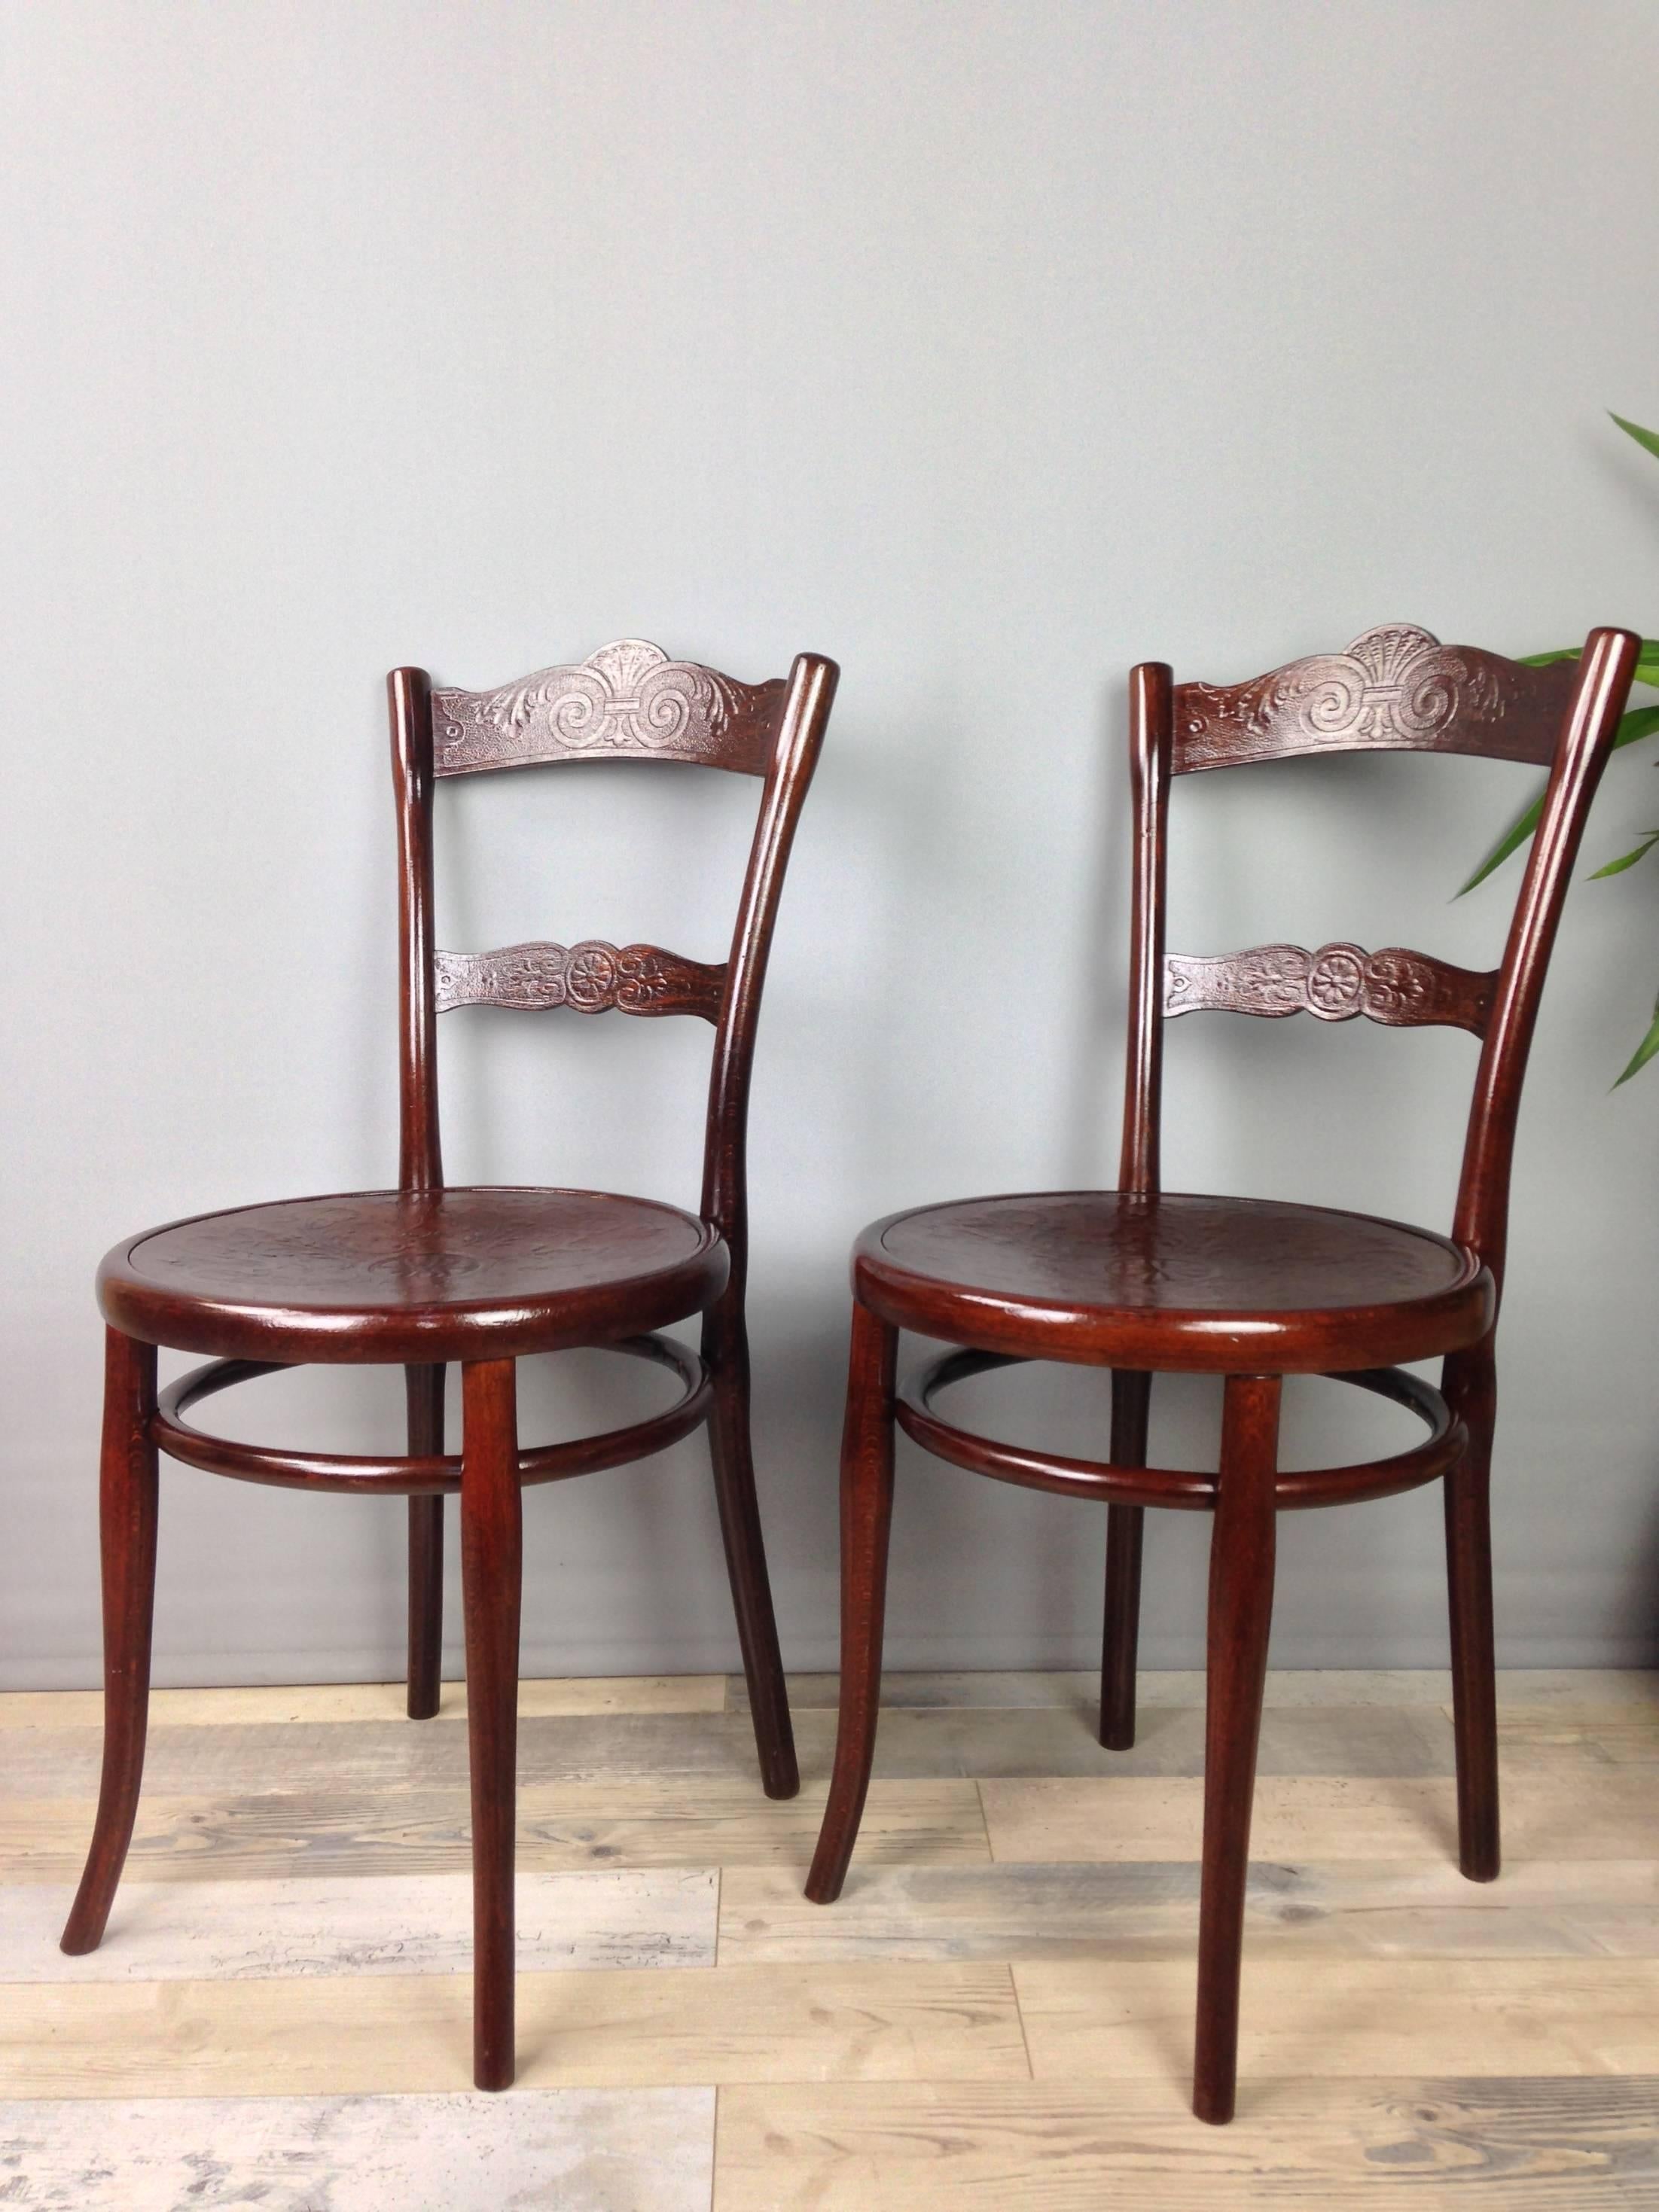 Art Nouveau Pair of Bentwood Thonet Chairs from the Beginning of the 20th Century